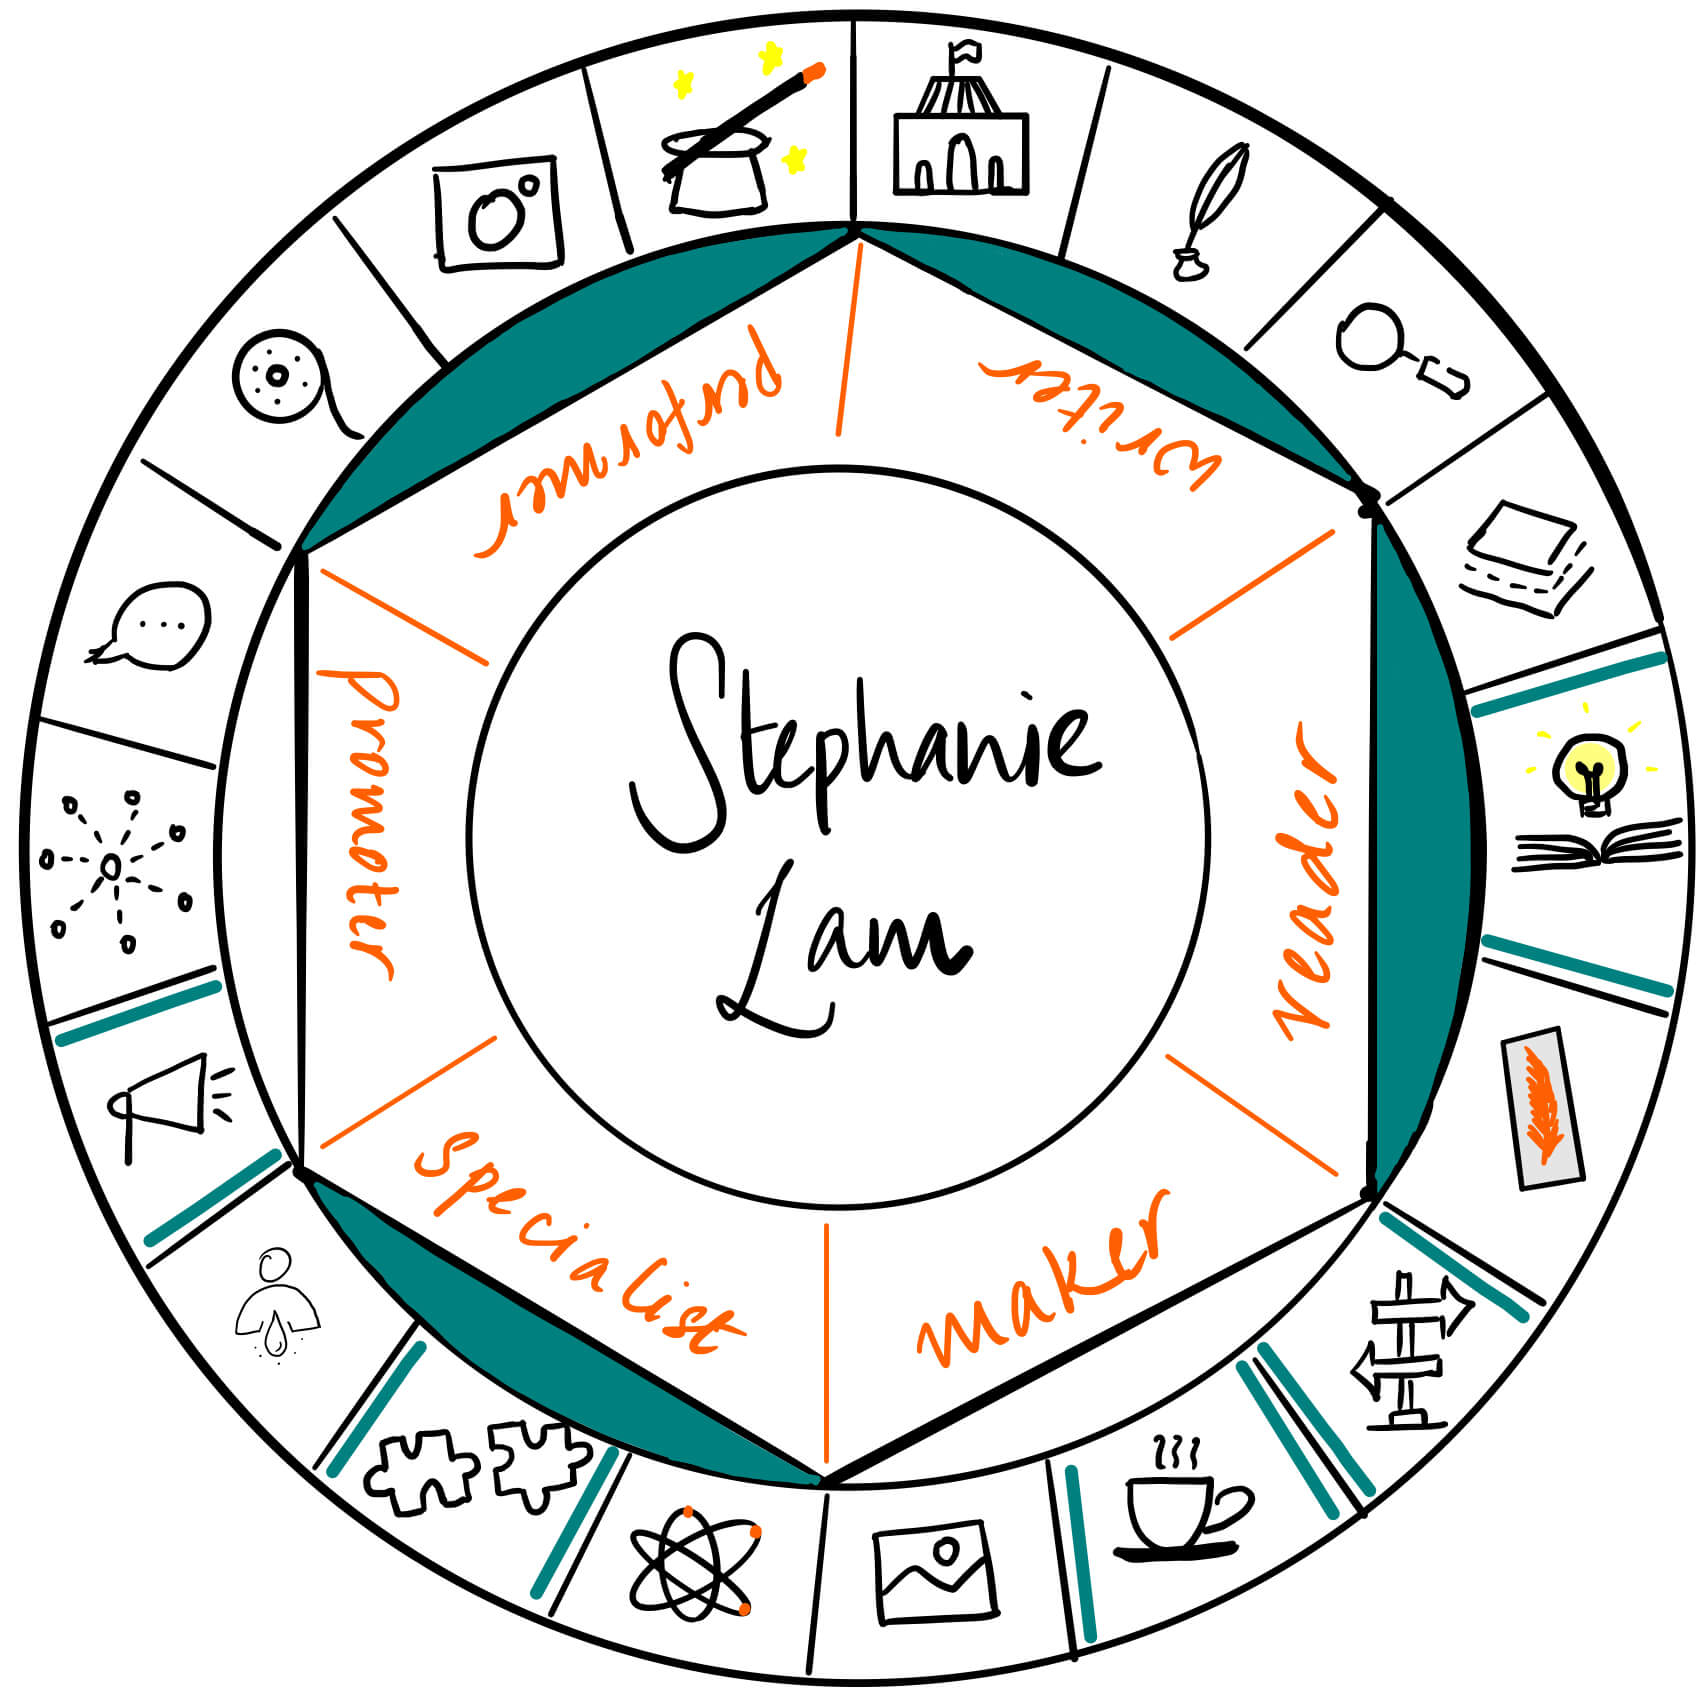 Stephanie Lam is a writer, promoter, reader and specialist. It's a pleasure to have her over on The Creator's Roulette to talk about finding calm in this fast-track world of technology and social media.